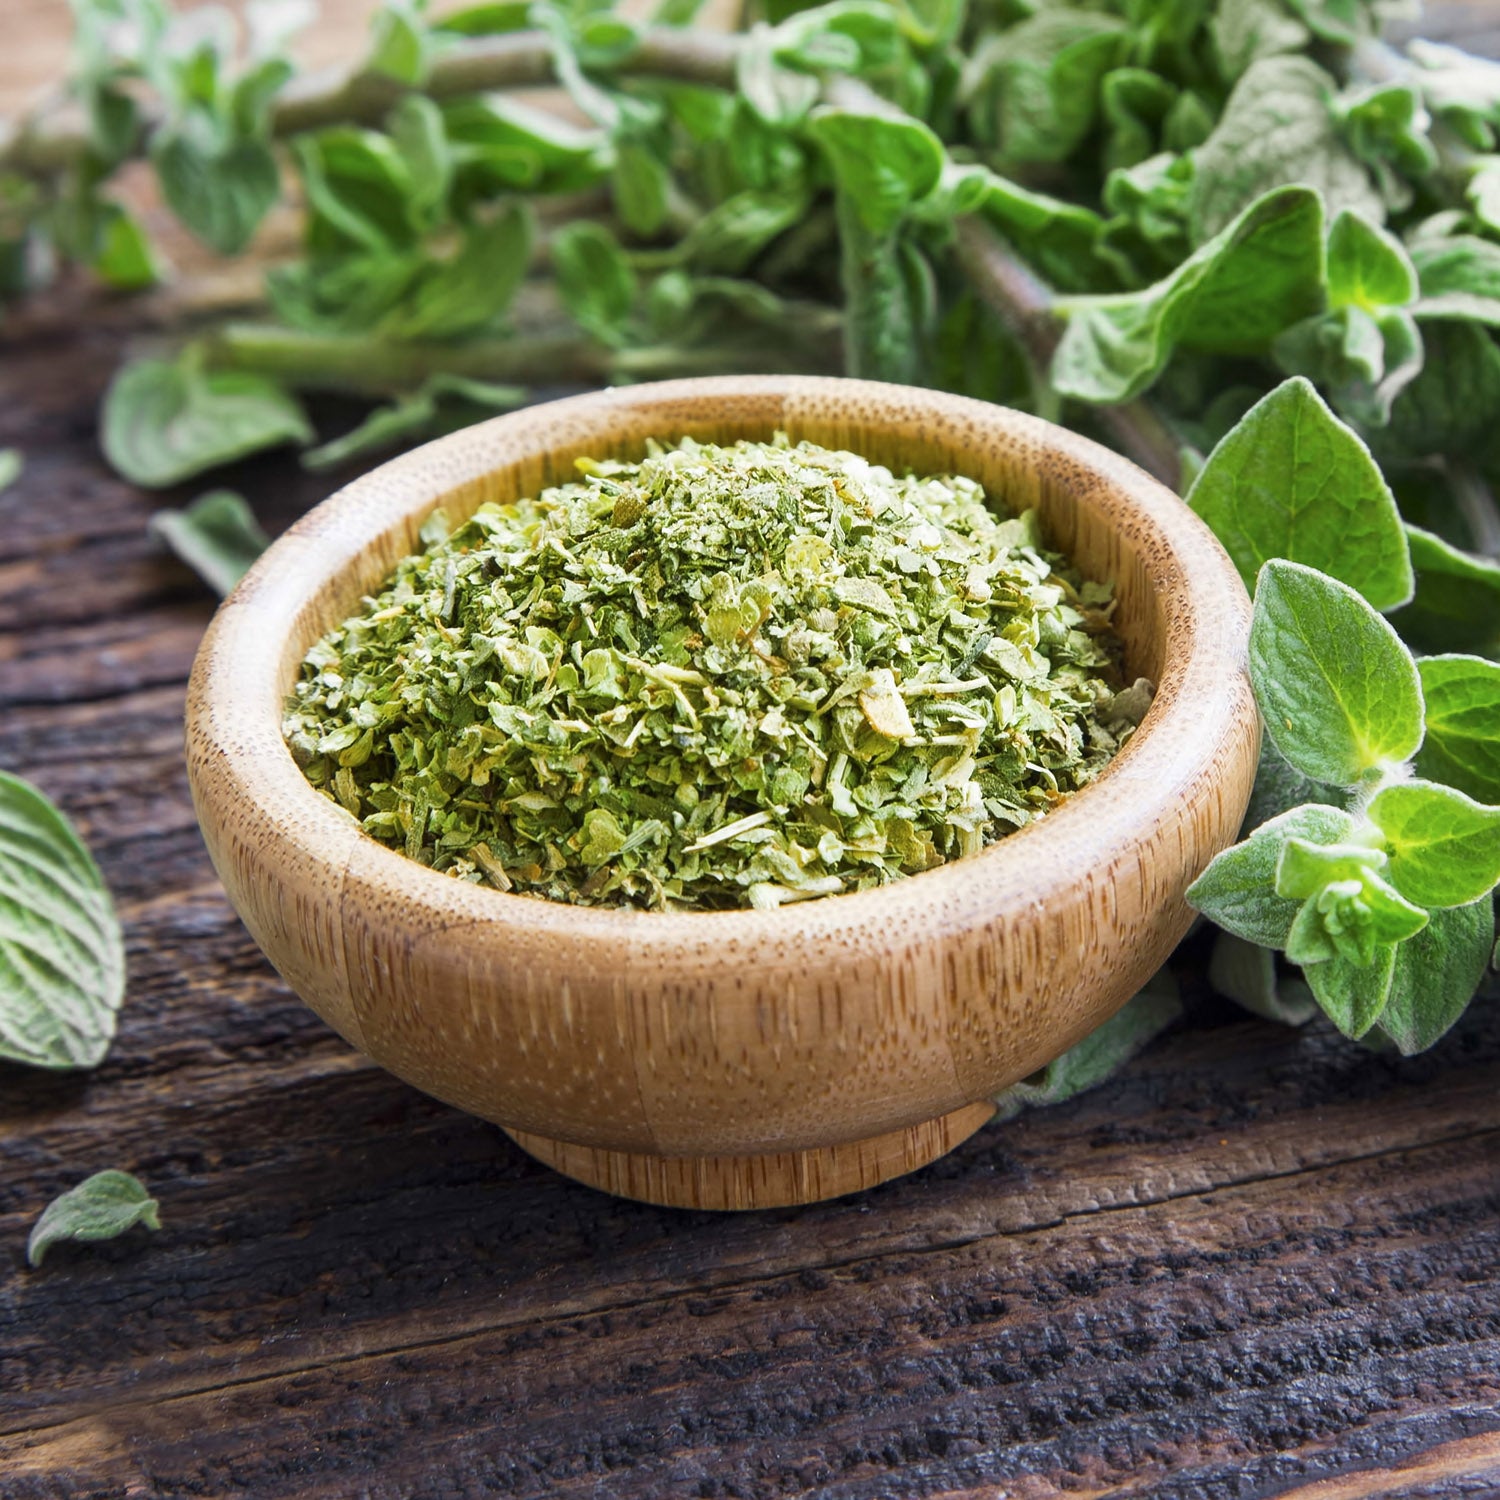 How Athletes Can Get Micronutrients From Oregano